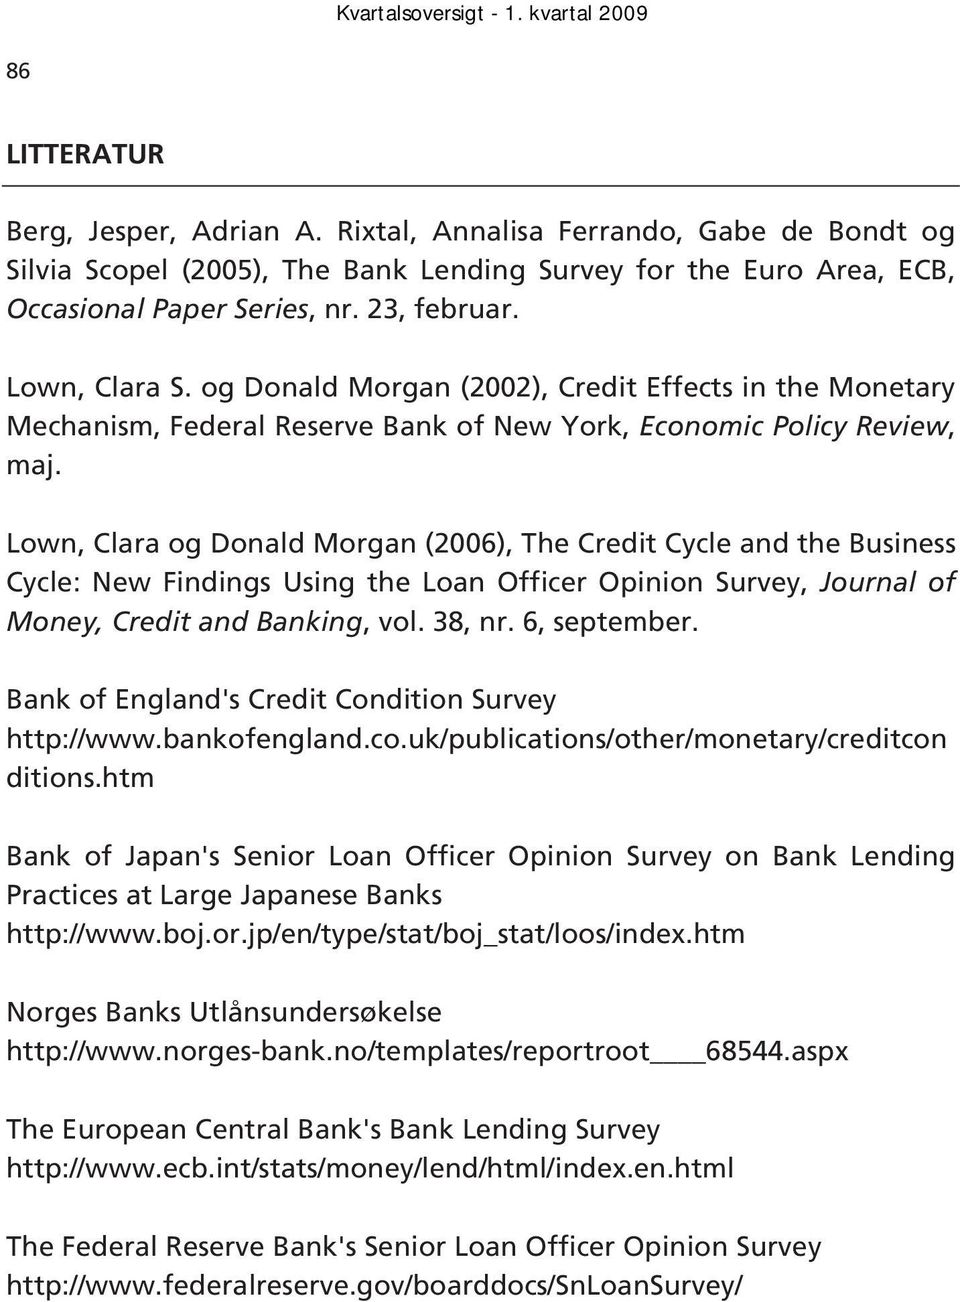 Lown, Clara og Donald Morgan (2006), The Credit Cycle and the Business Cycle: New Findings Using the Loan Officer Opinion Survey, Journal of Money, Credit and Banking, vol. 38, nr. 6, september.